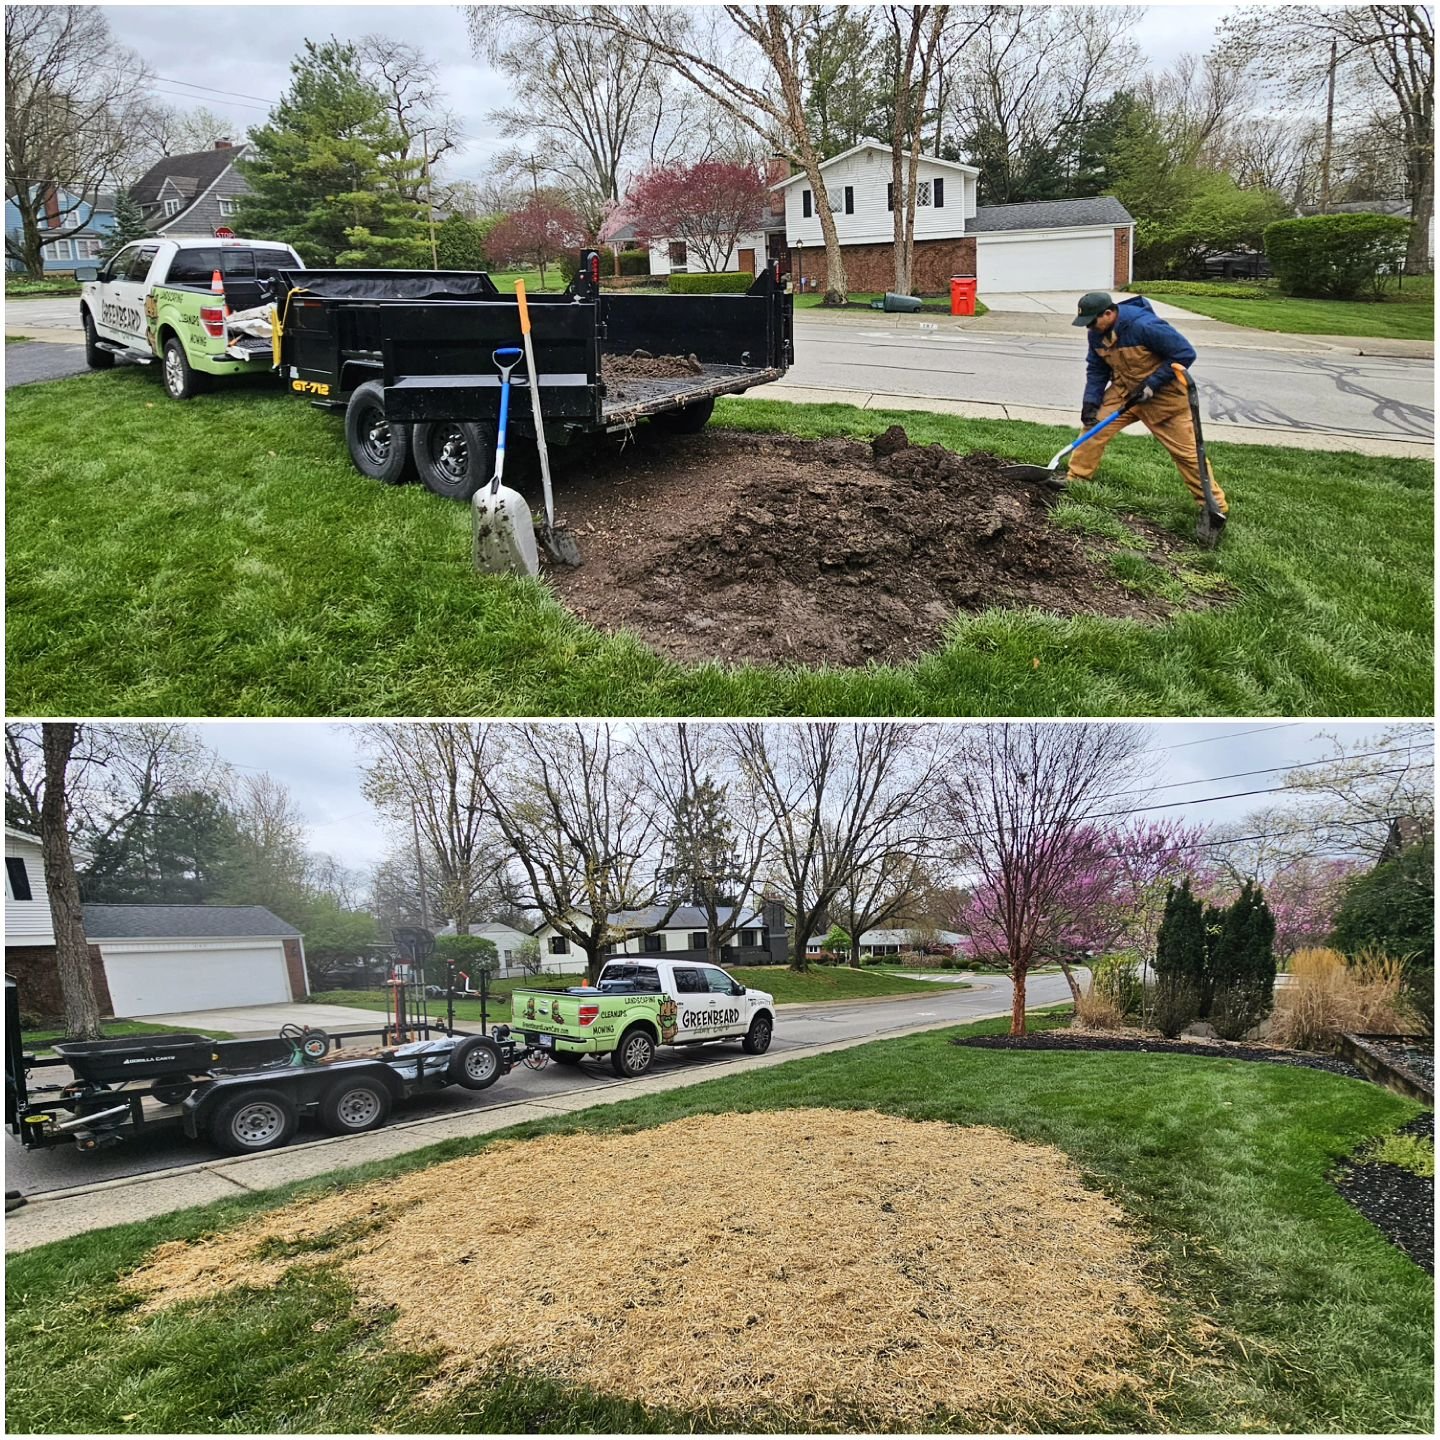 Reviving this patch with a little TLC! 🌳💚 Saying farewell to a tree doesn't mean waving goodbye to a beautiful lawn. #LawnRestoration #NewBeginnings